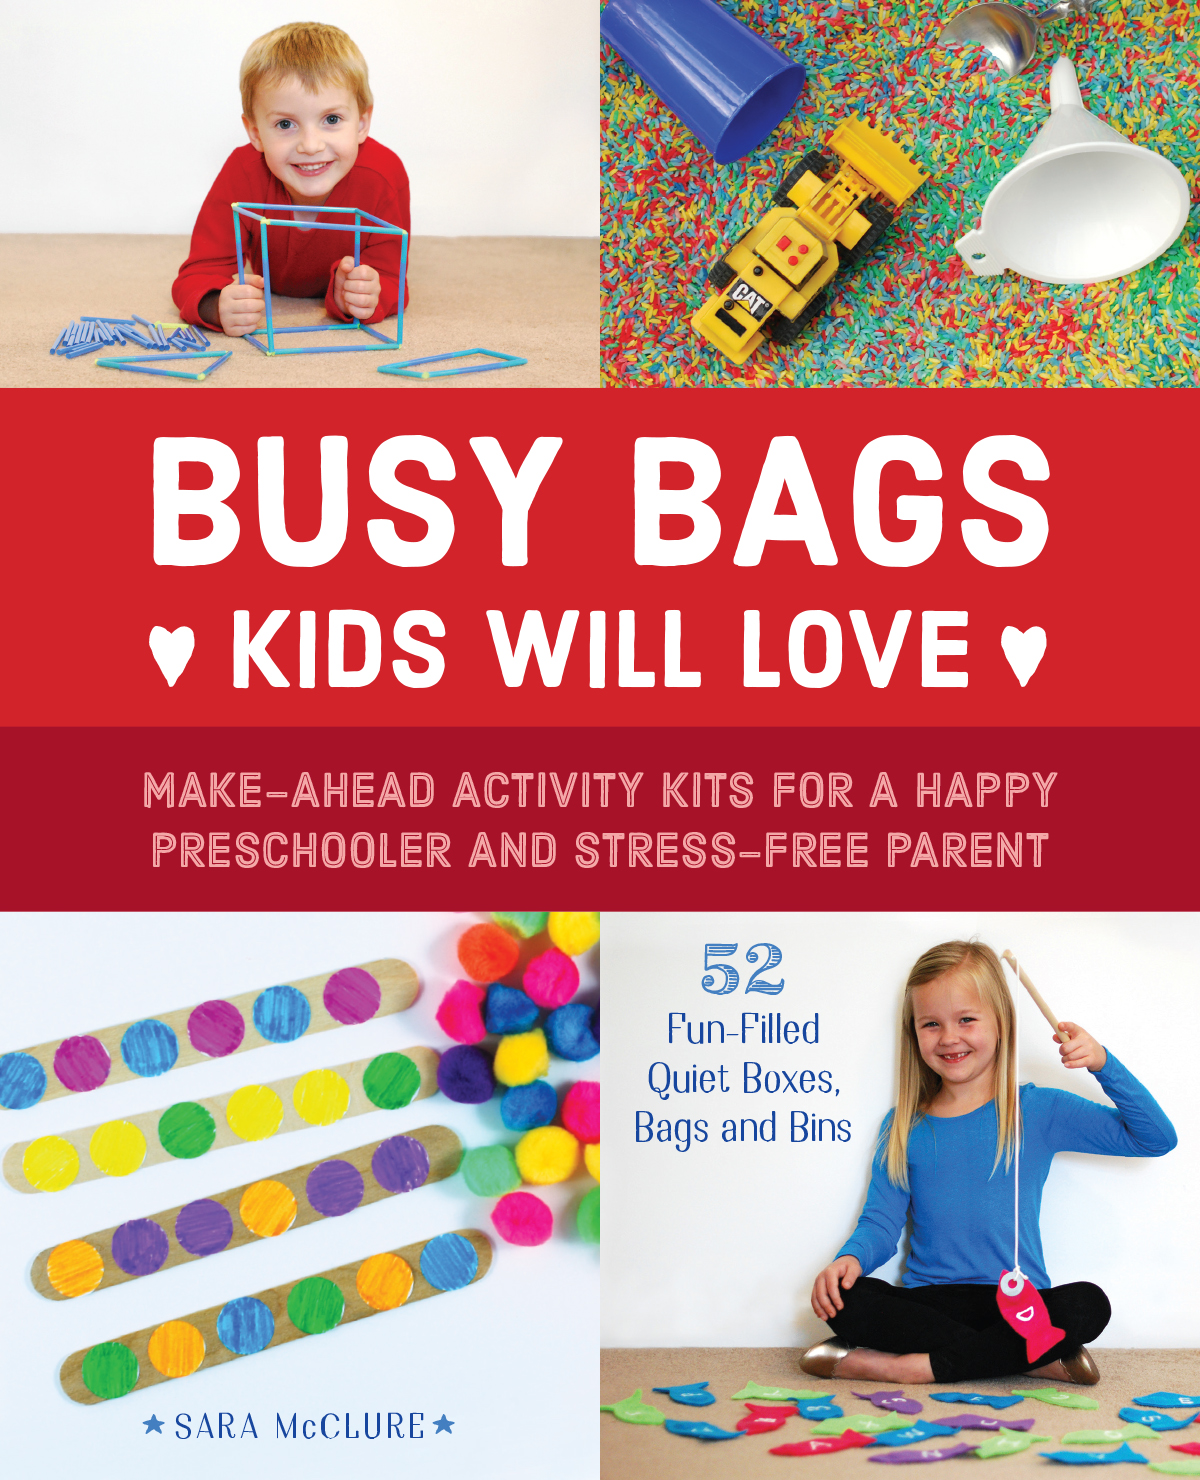 Busy Bags Kids Will Love: Make-Ahead Activity Kits for a Happy Preschooler and a Stress-Free Parent is packed full of enough ideas for every week of the year. This book provides your kids with entertaining, exciting and educational activities your preschoolers will love!